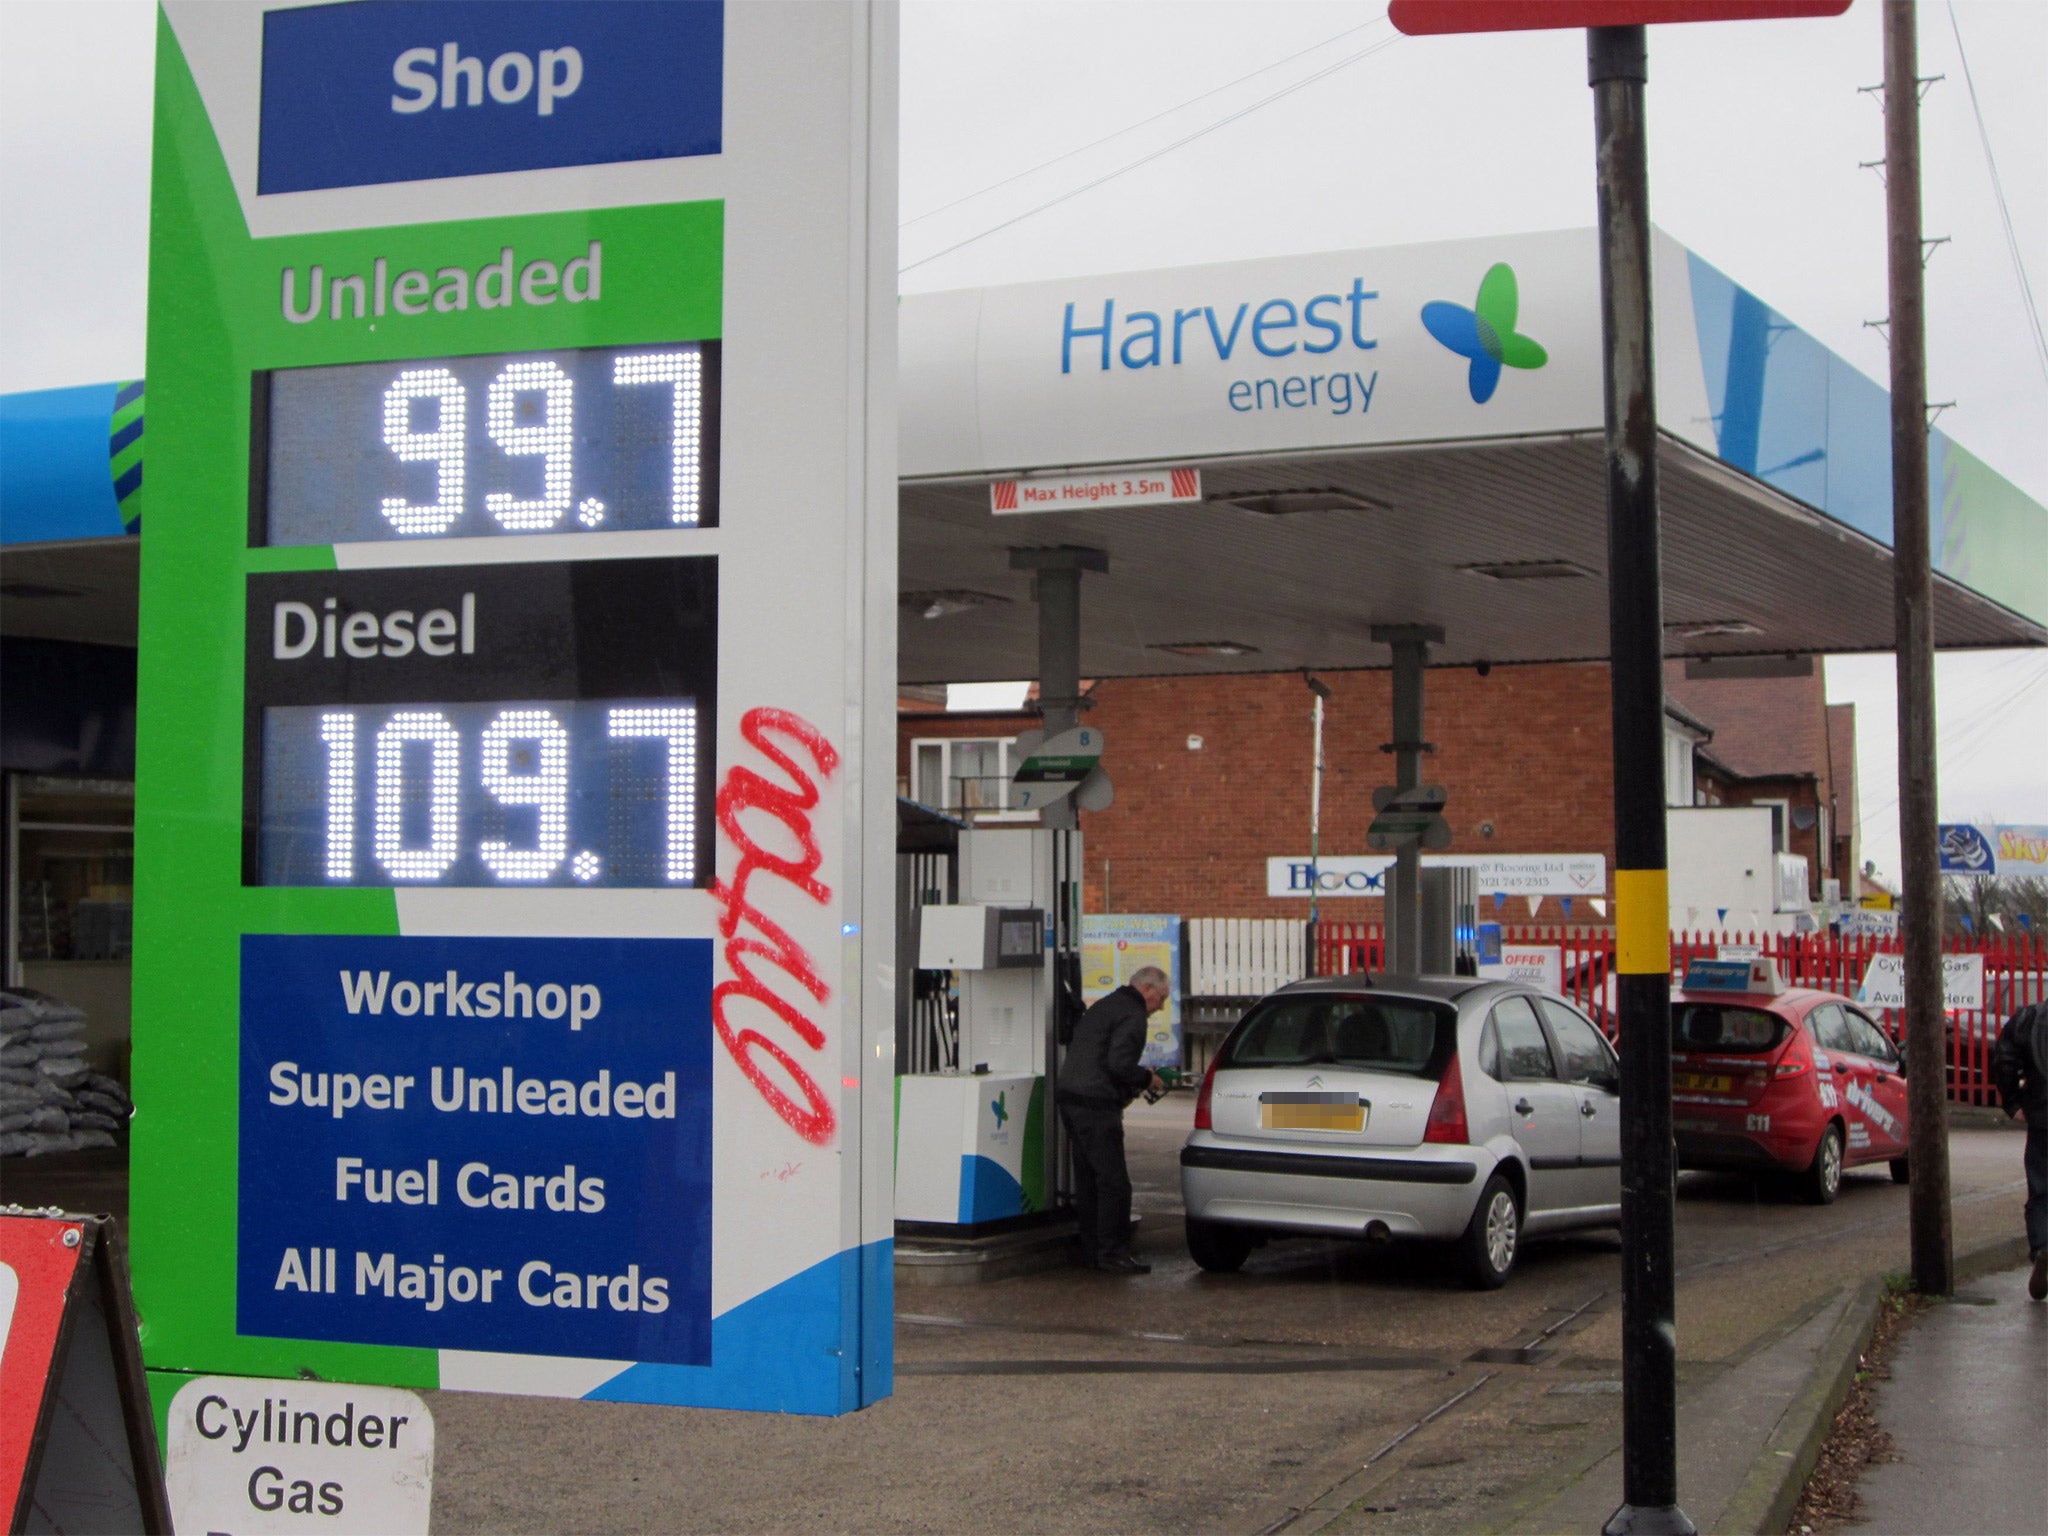 Massive downward pressure was exerted by fuel prices, which were 31 per cent lower than January last year